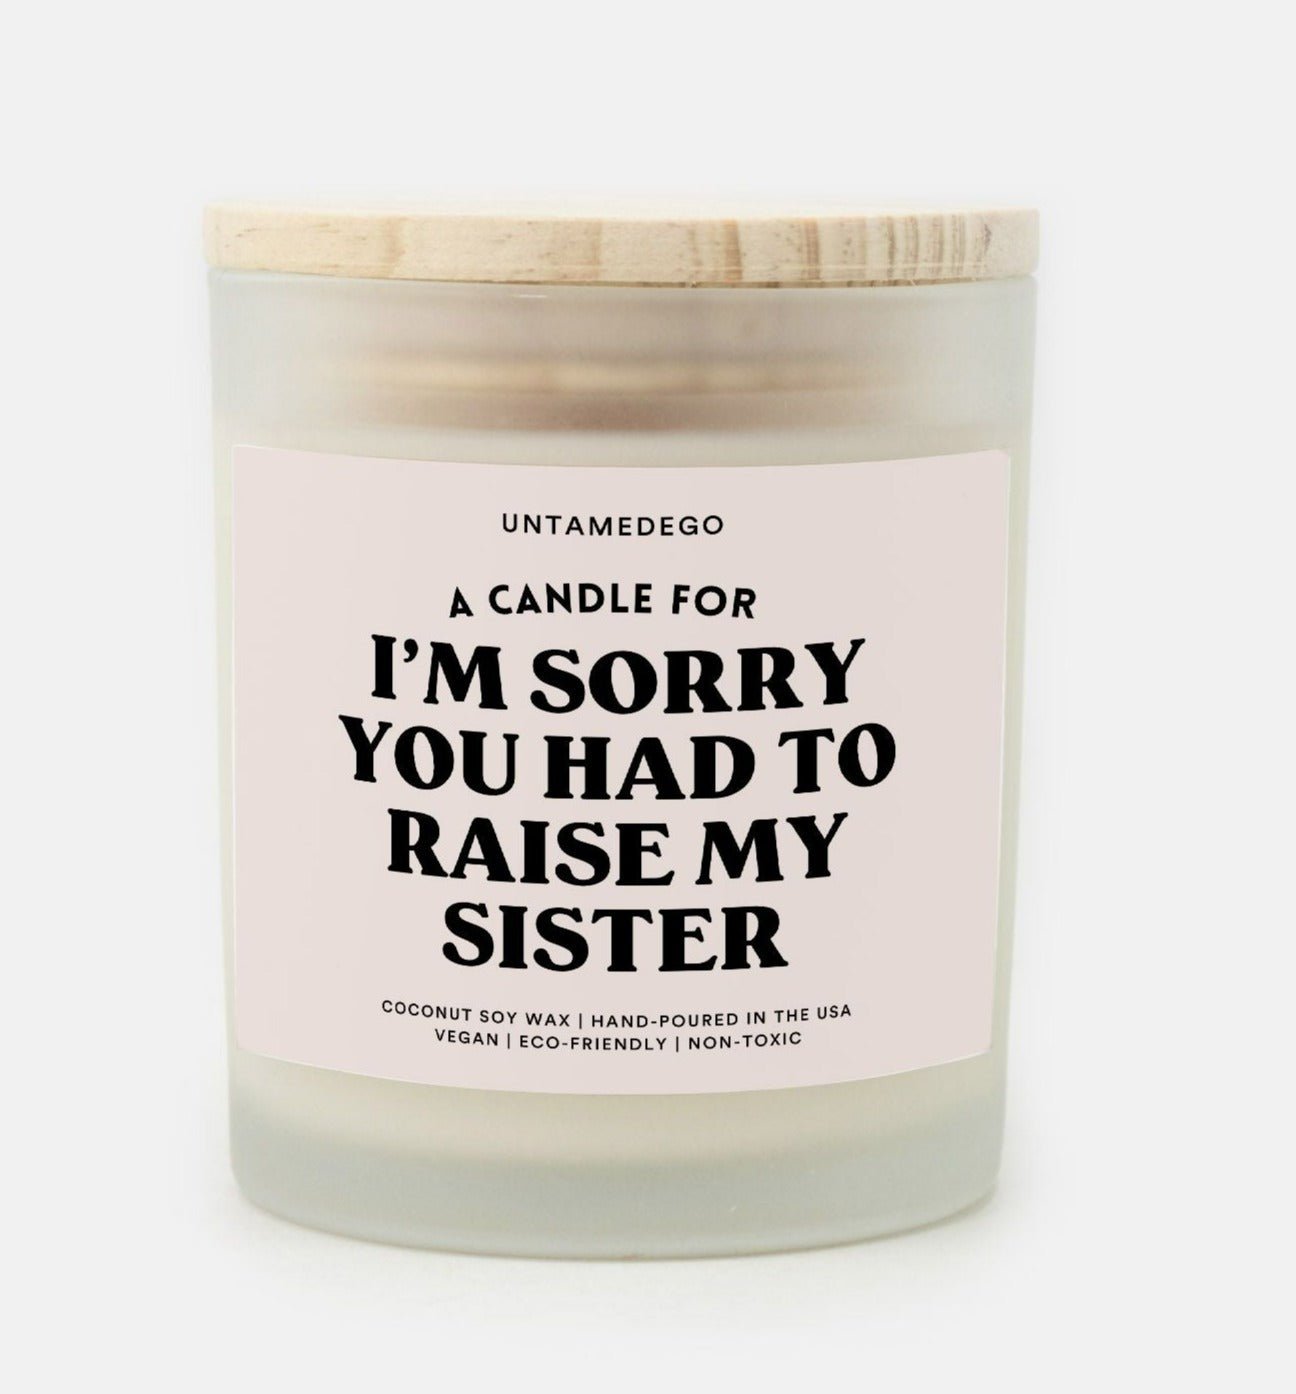 Sorry You Had To Raise My Sister Frosted Glass Jar Candles Best Sellers Gift Set - UntamedEgo LLC.